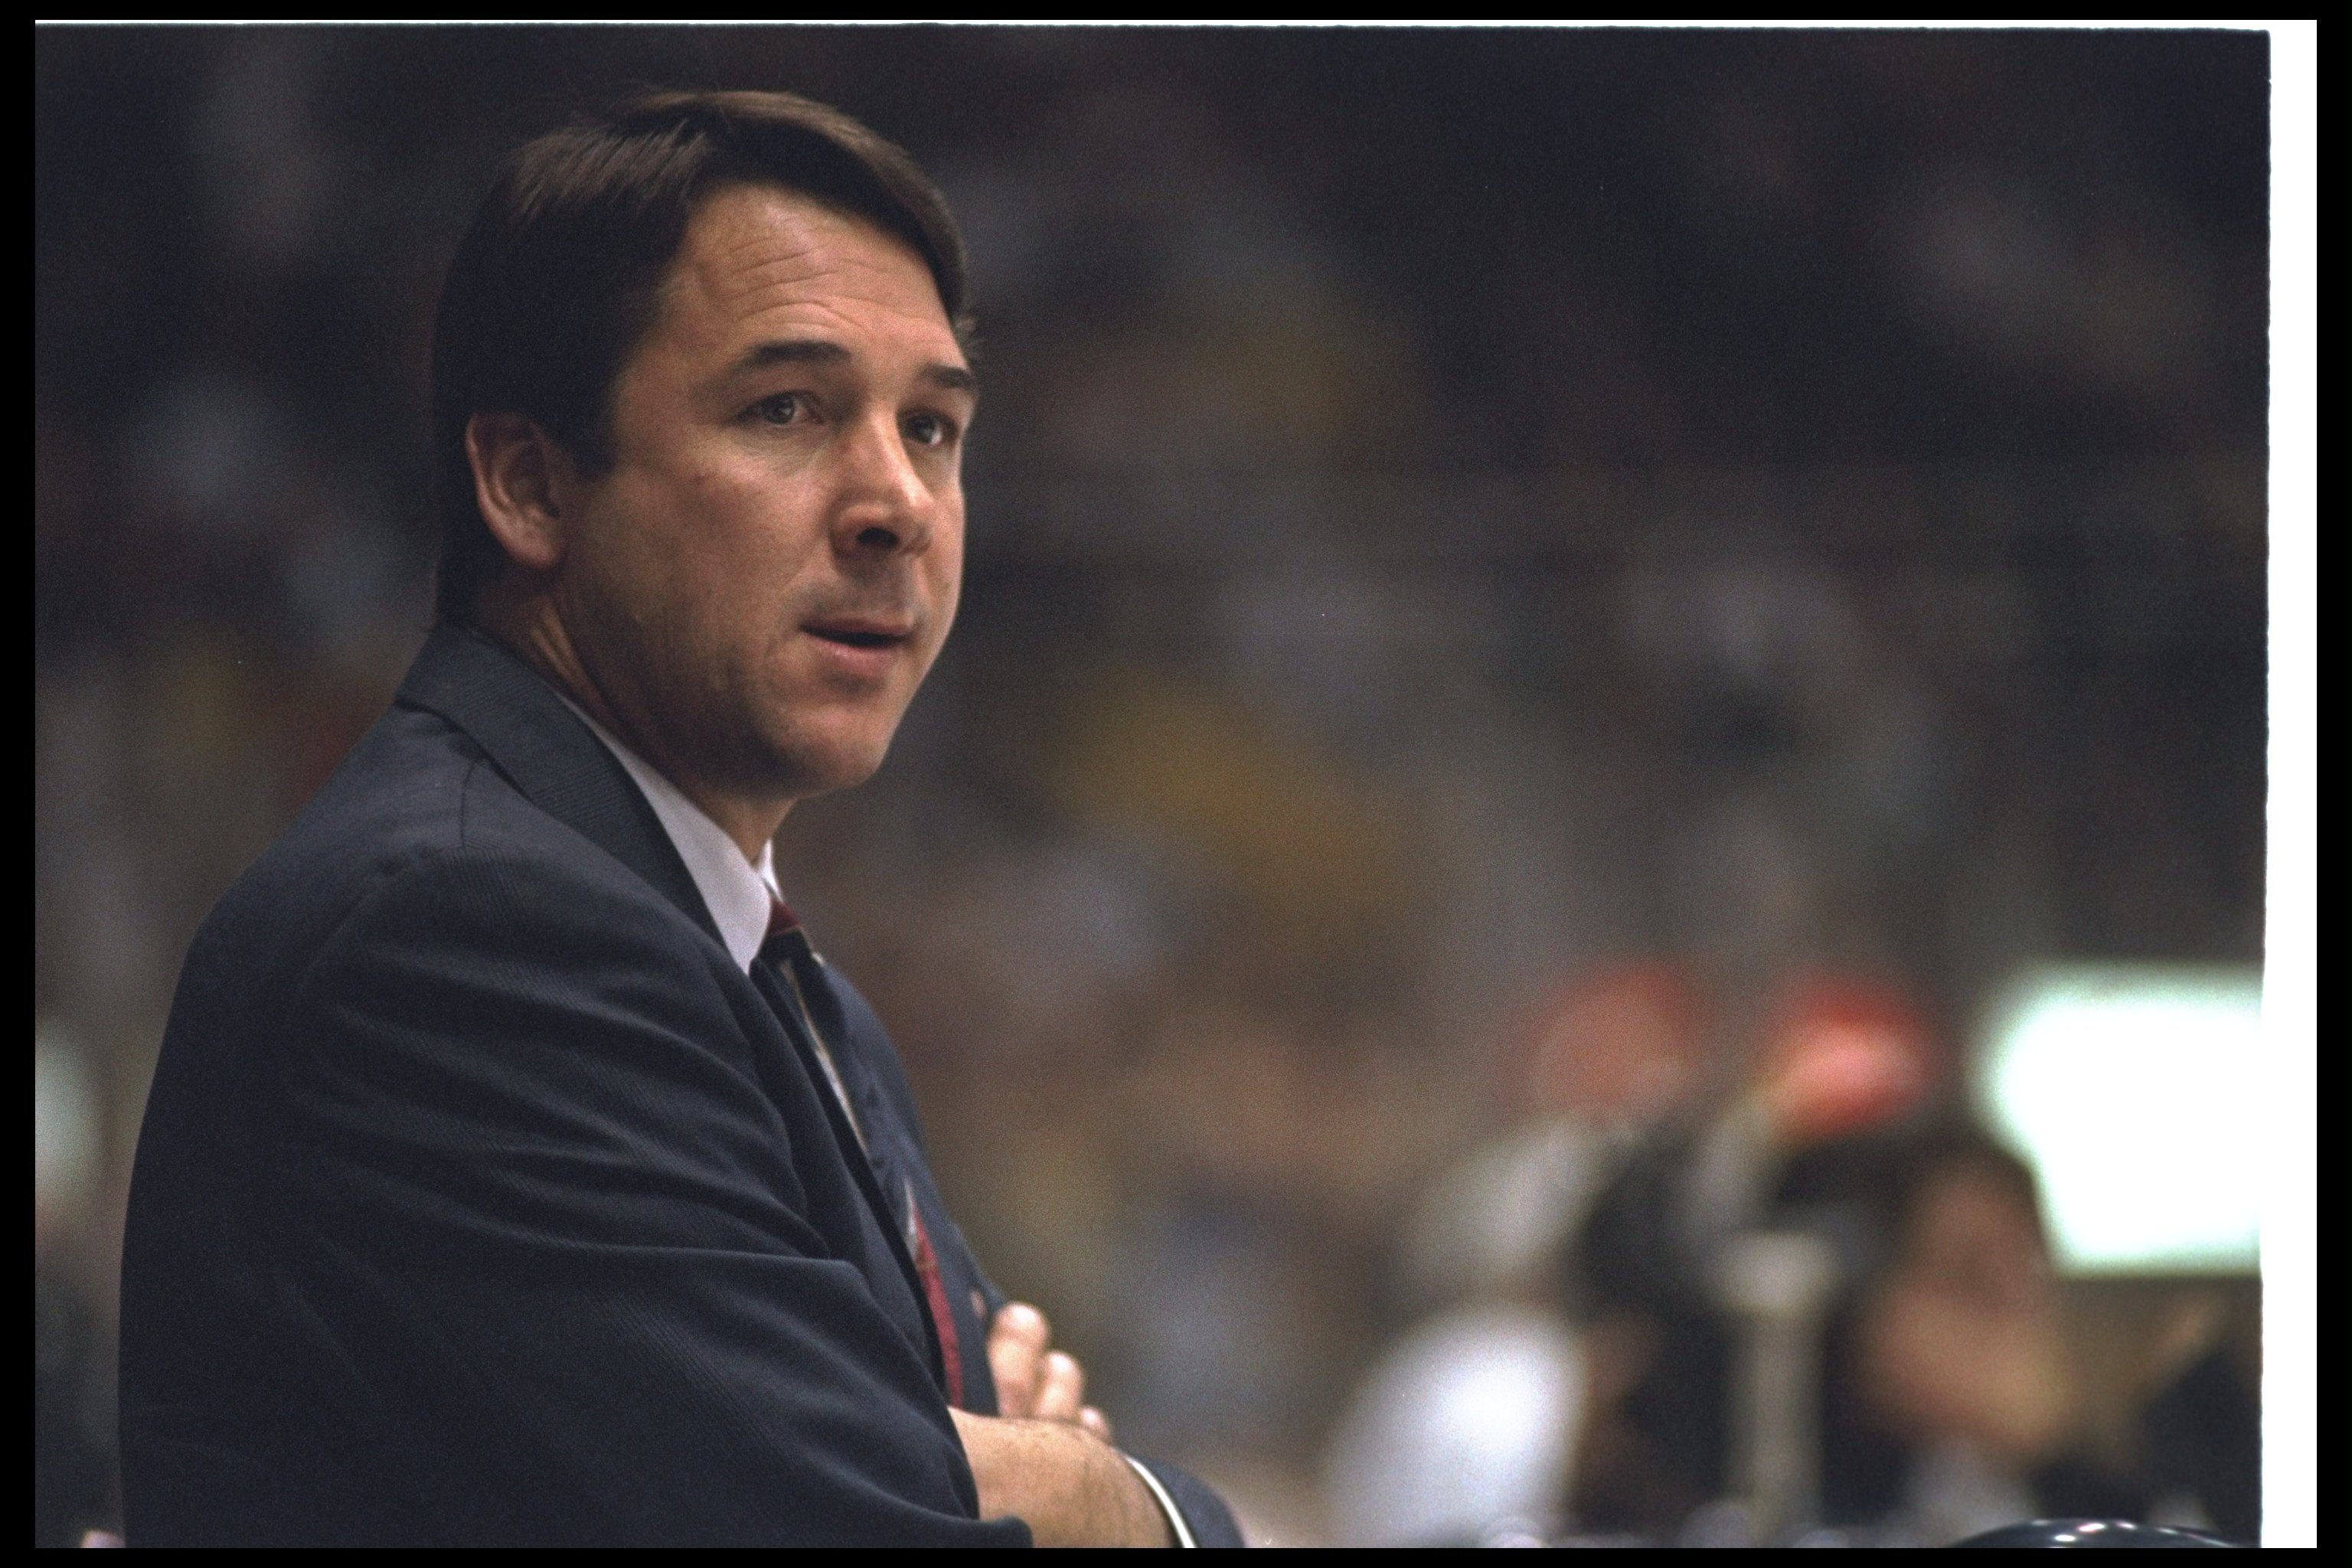 "Get the hell out of my office" - the Mike Milbury story